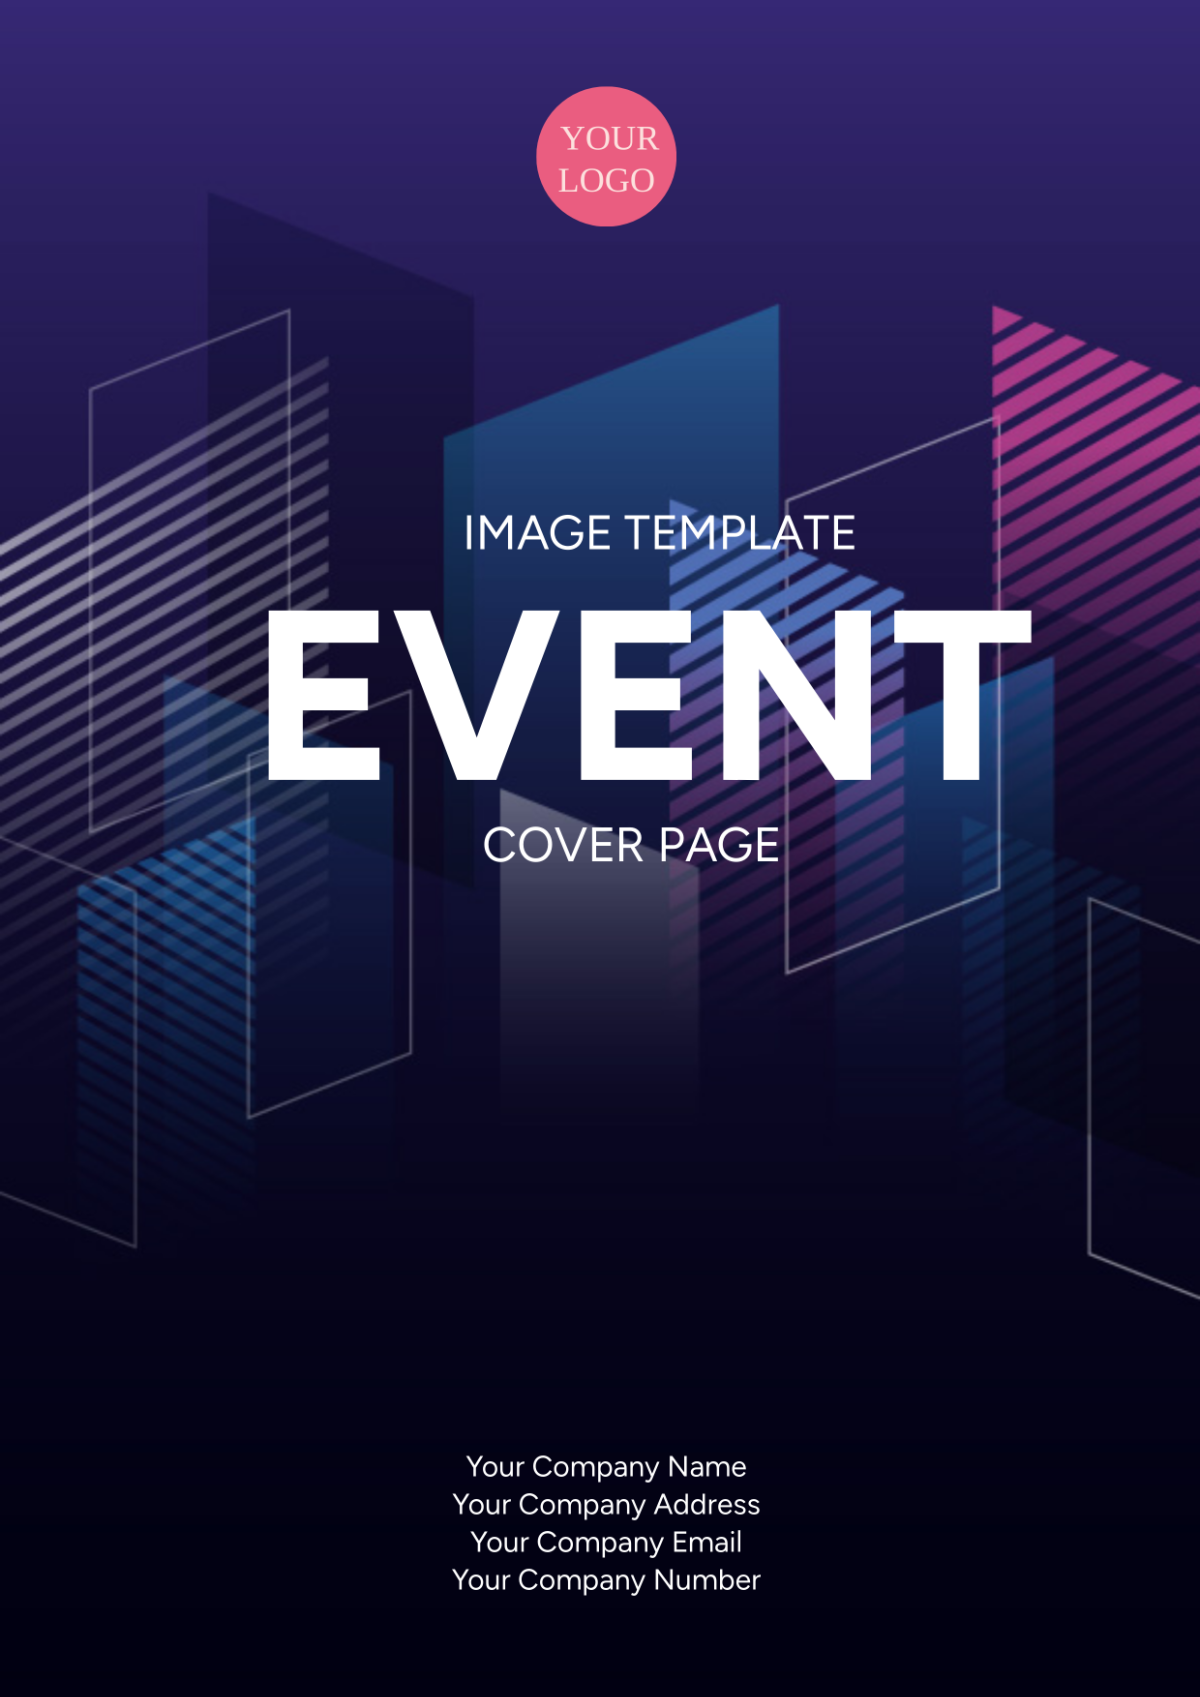 Event Cover Page Image